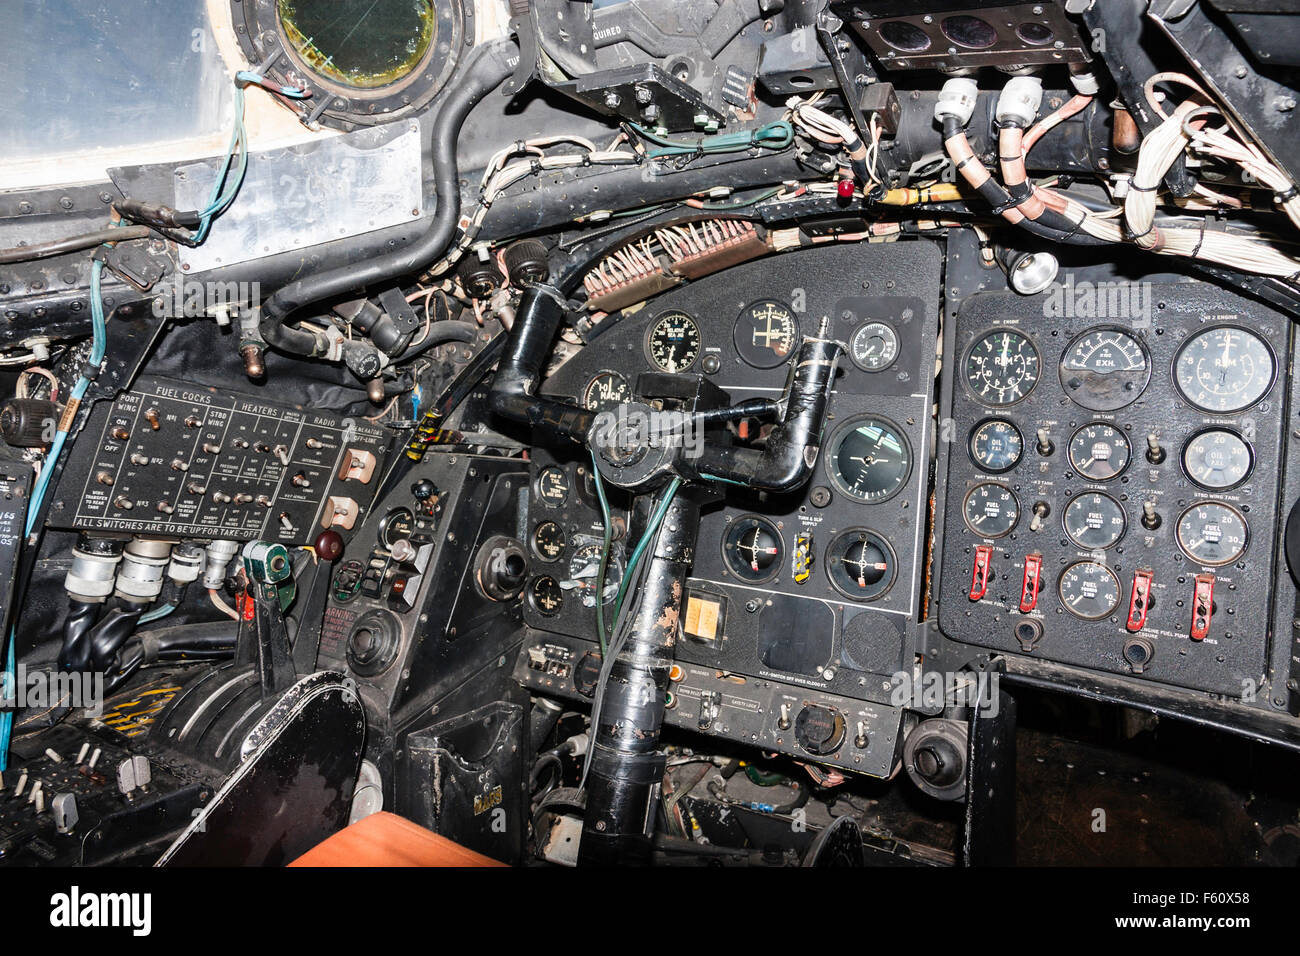 Interior of RAF Canberra bomber showing pilot's seat with front and side control panels. Stock Photo